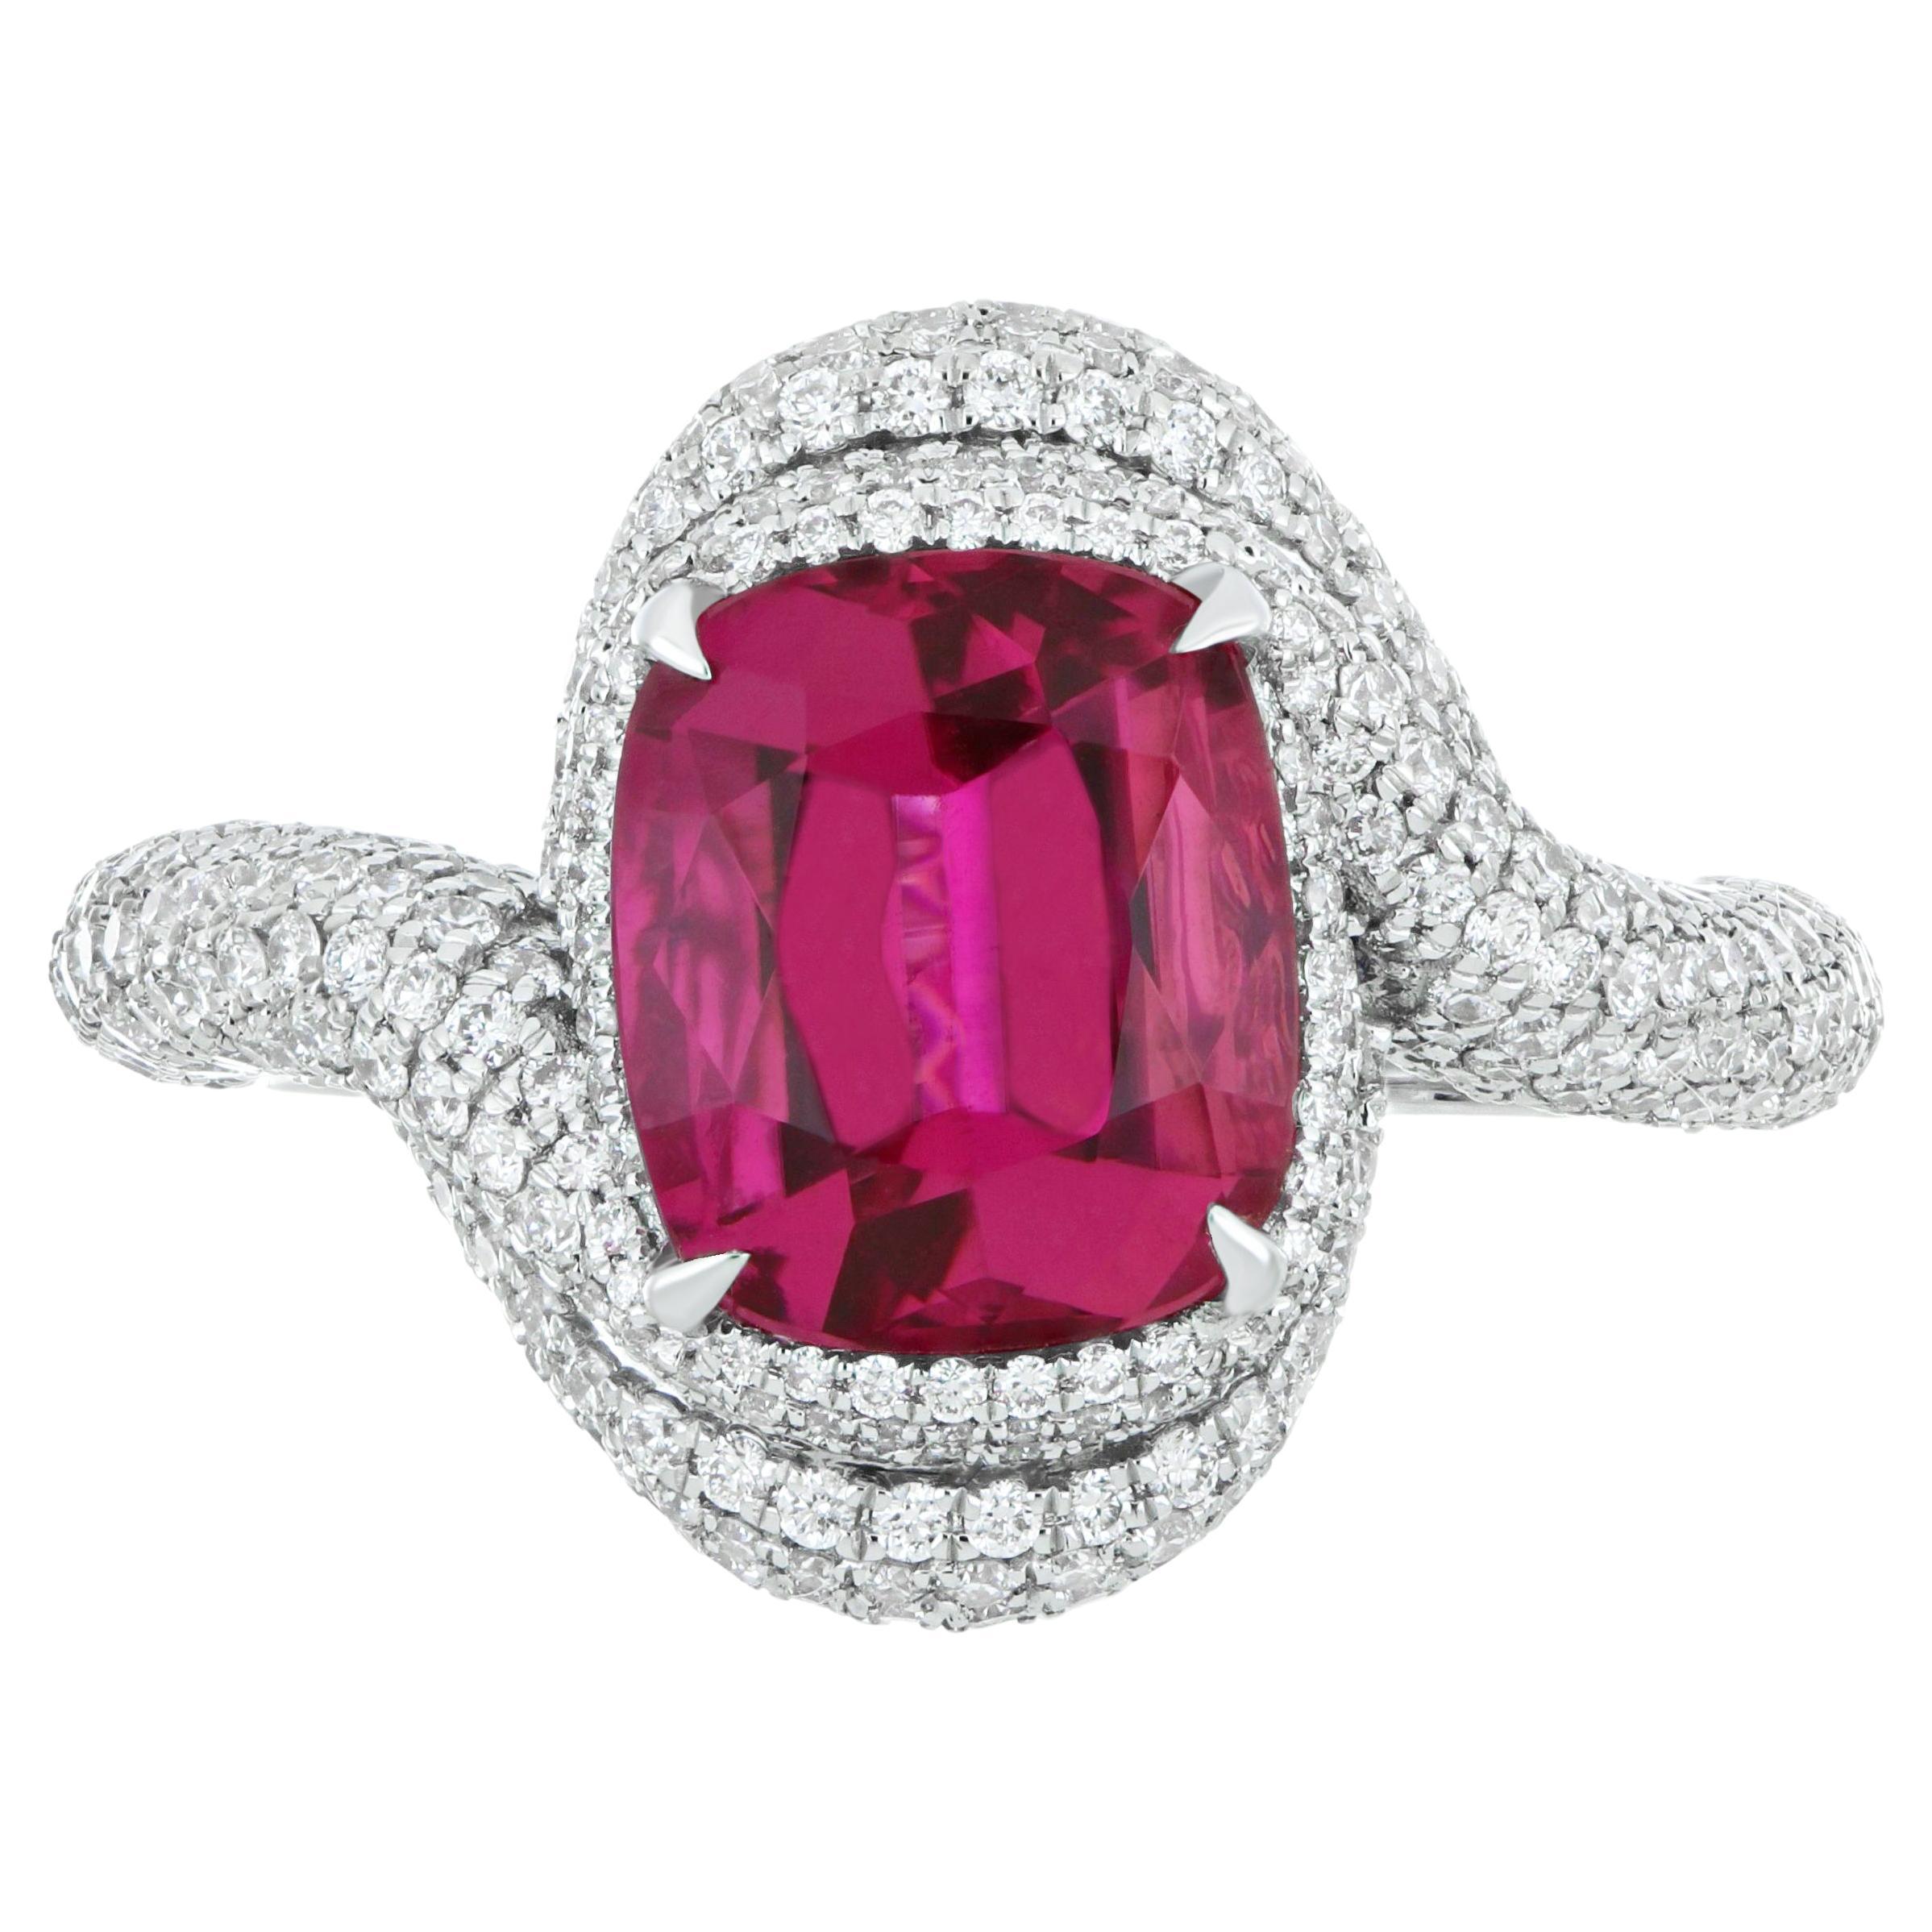 4.05 Carats Rubellite and Diamond Studded Ring in 18K White Gold Ring